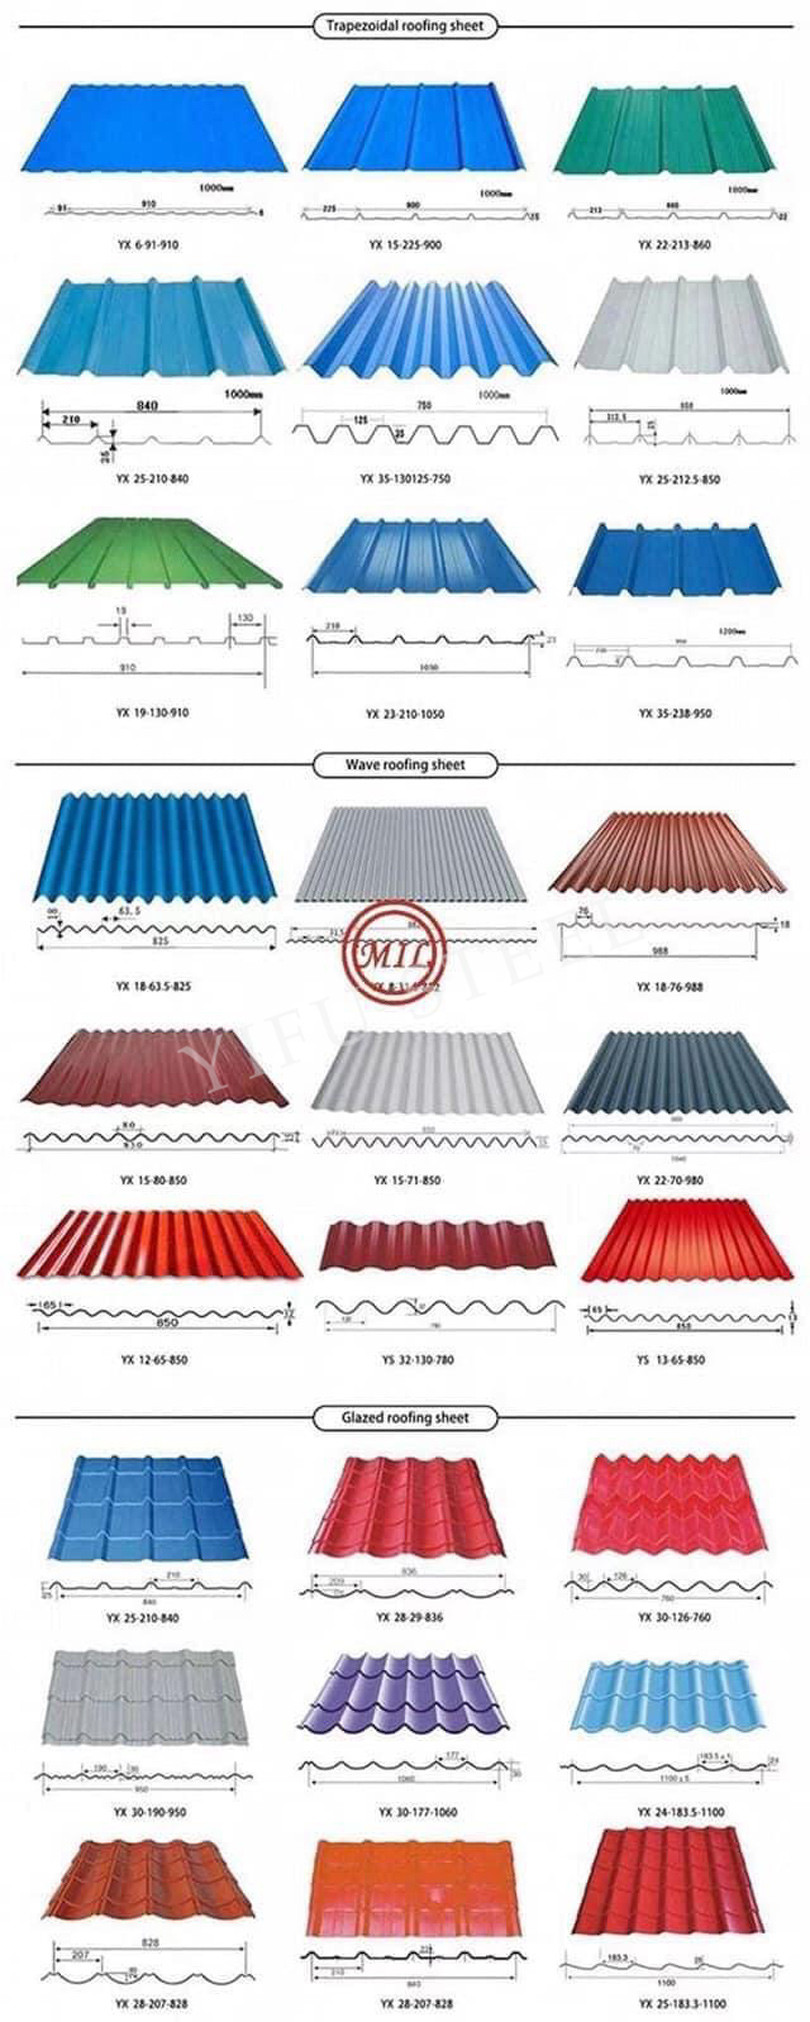 Factory-High-Quality-Galvanized-Coated-Coated-Corrugated-Sheet-Metal-Roofing-Sheet-details1